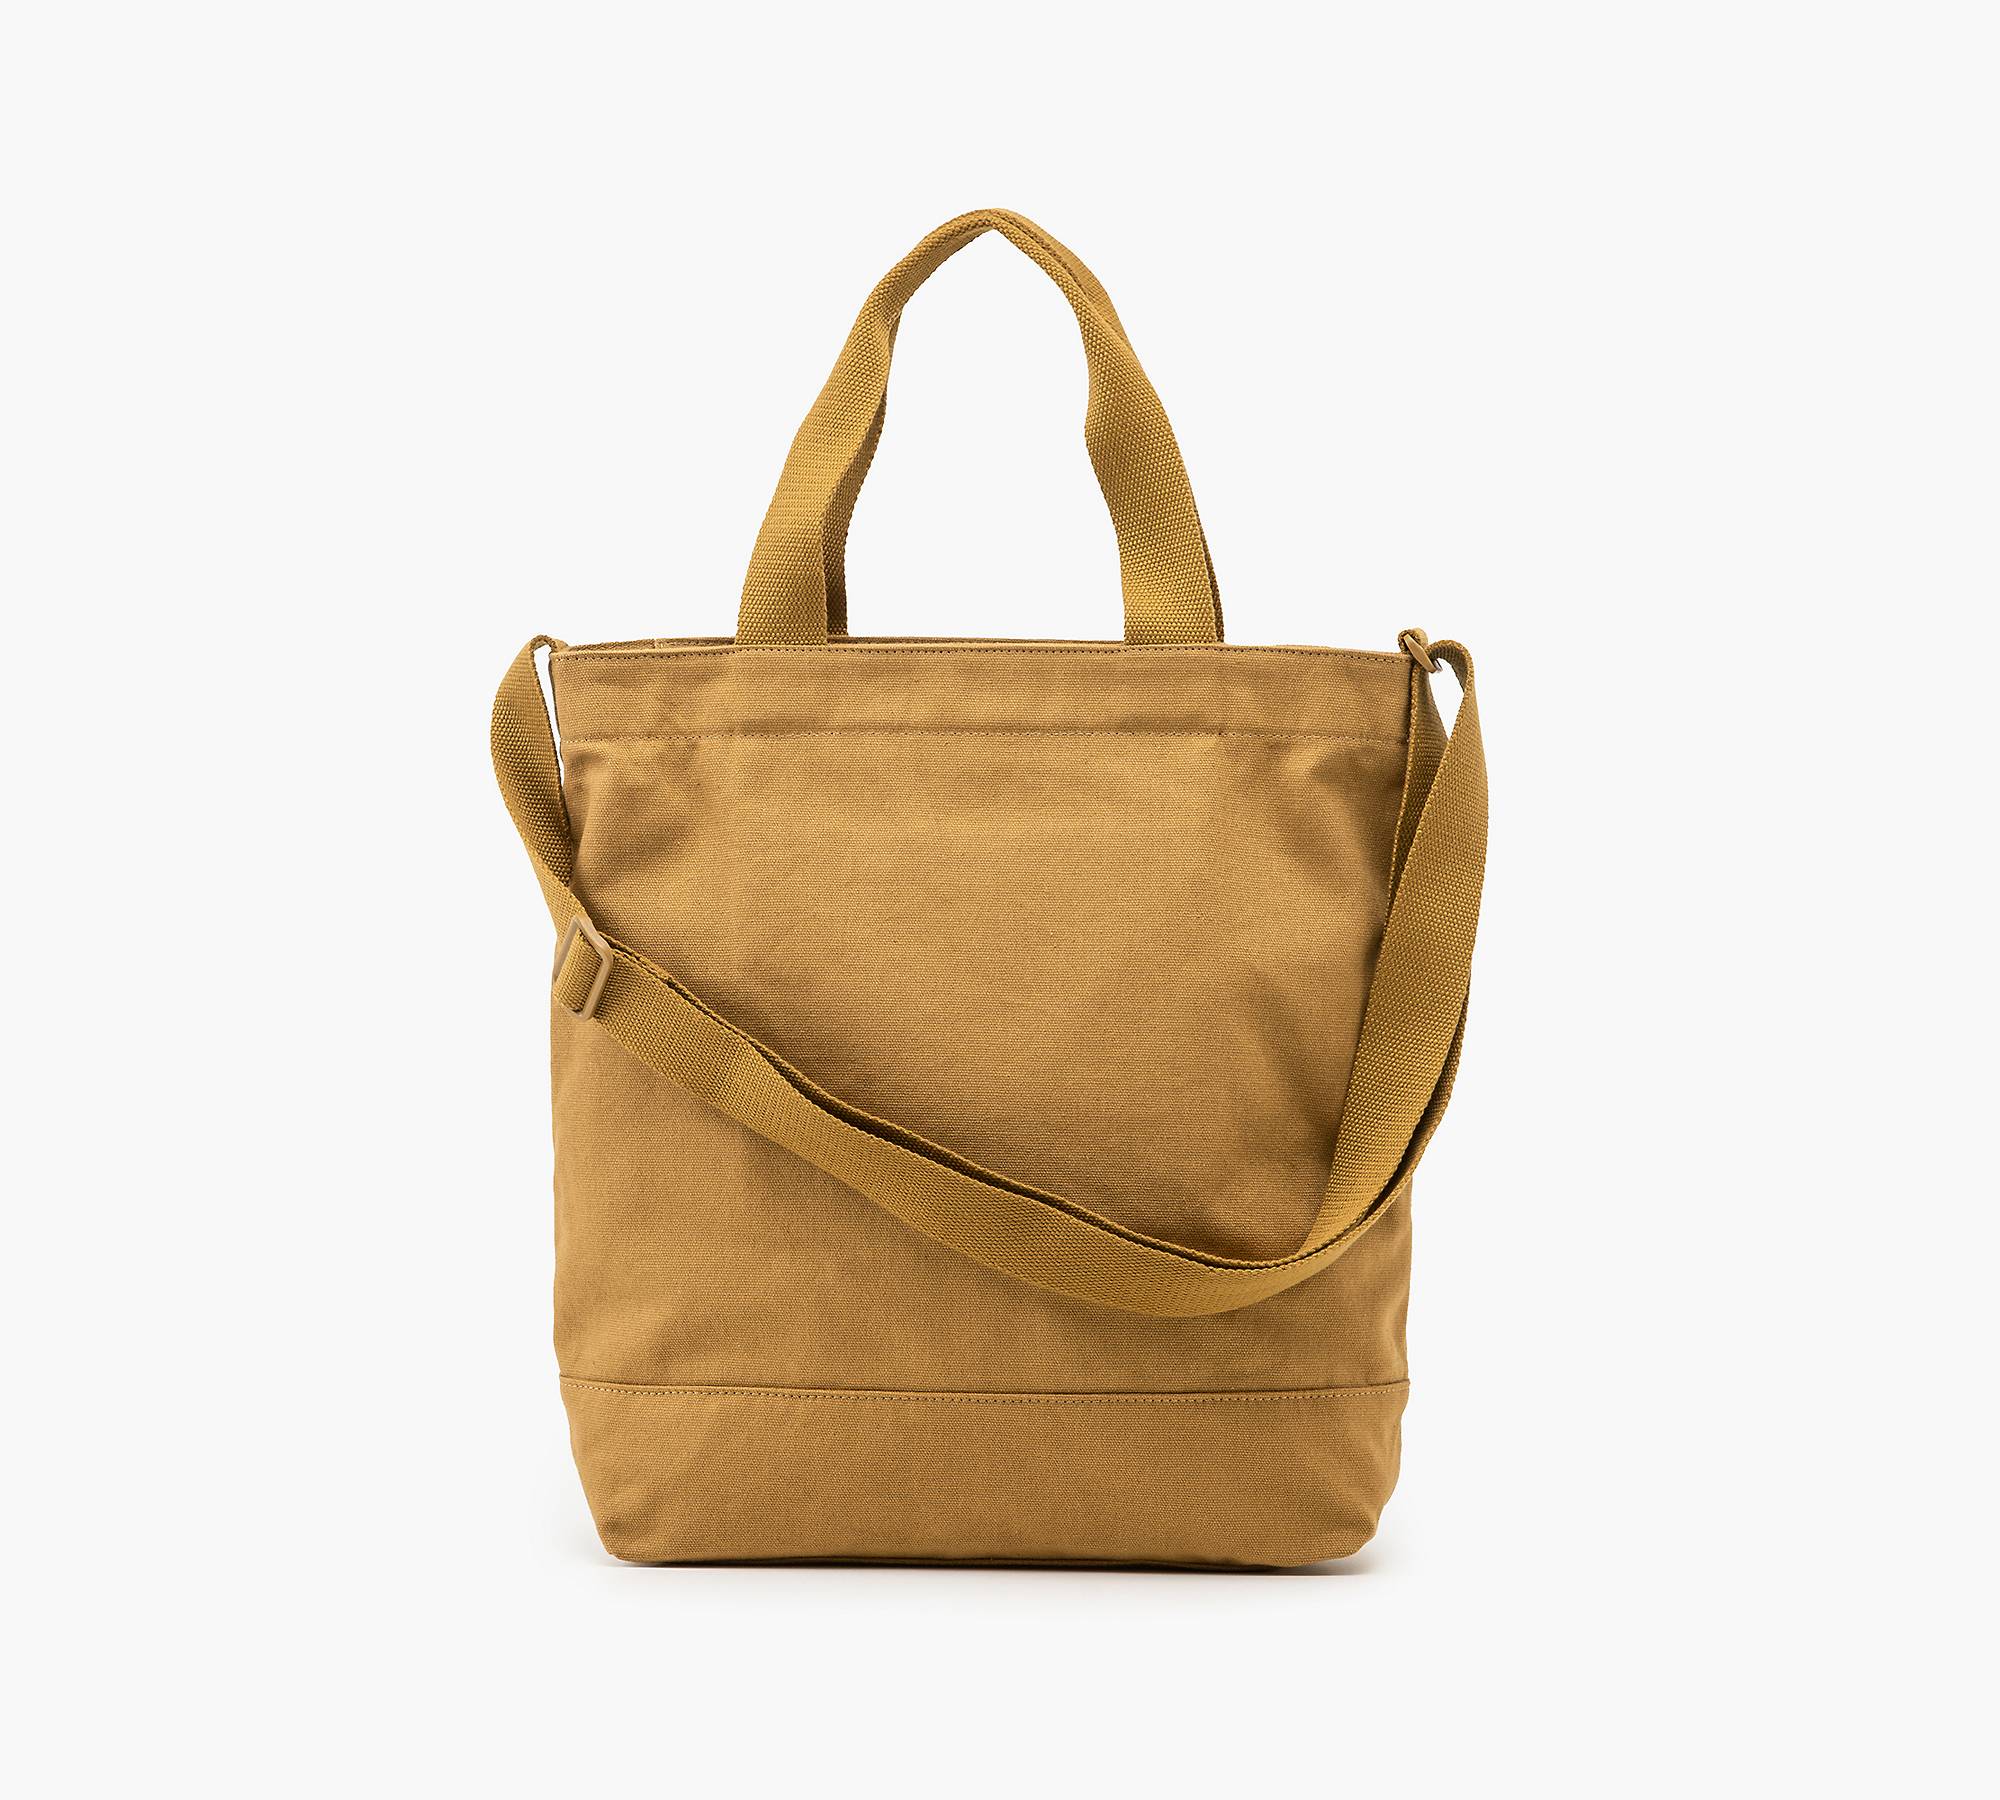 tote bag with